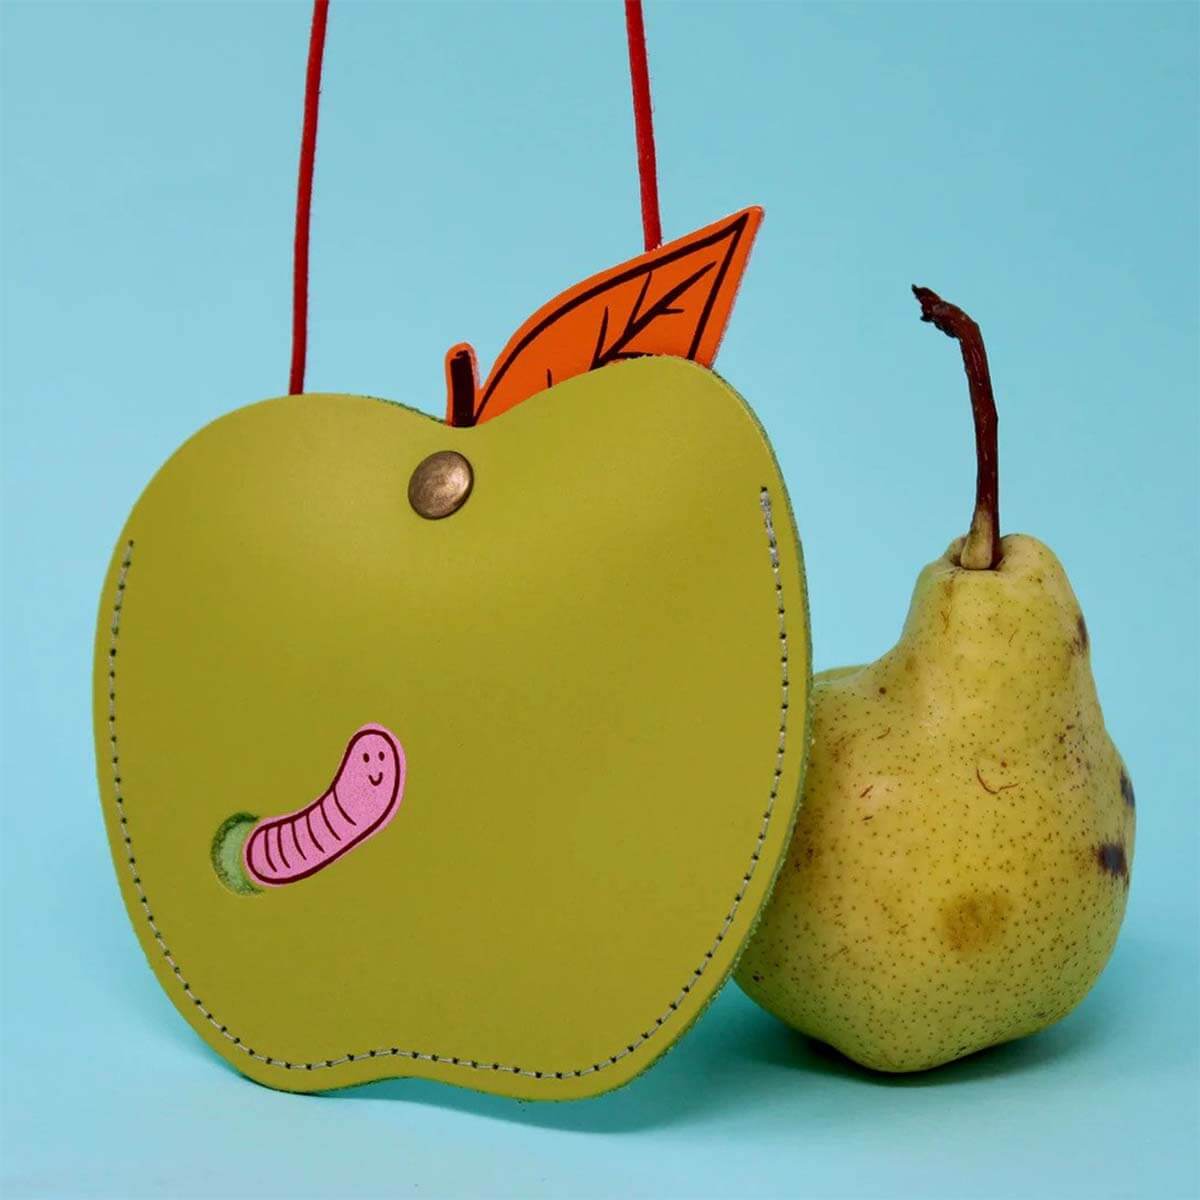 Women's PU Small Cute Apple Shape Handbag PU Leather Purse Shoulder Bag  Clutch Red : Buy Online at Best Price in KSA - Souq is now Amazon.sa:  Fashion